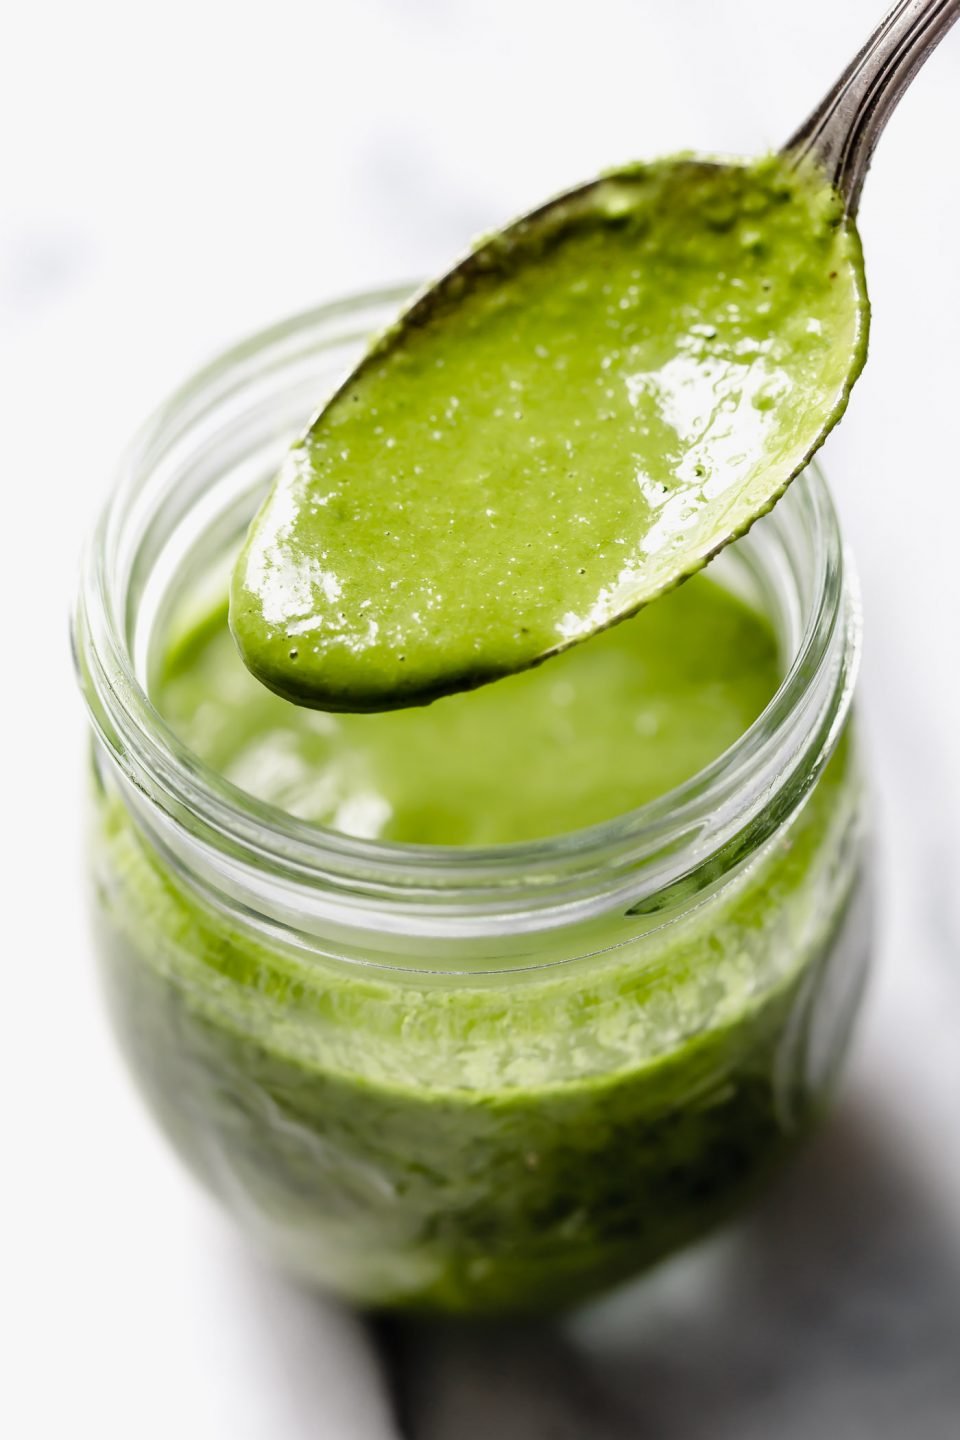 Green Goddess dressing in small jar with spoon drizzling dressing into jar. Jar placed on white marble surface with fresh chives & basil leaves around it.